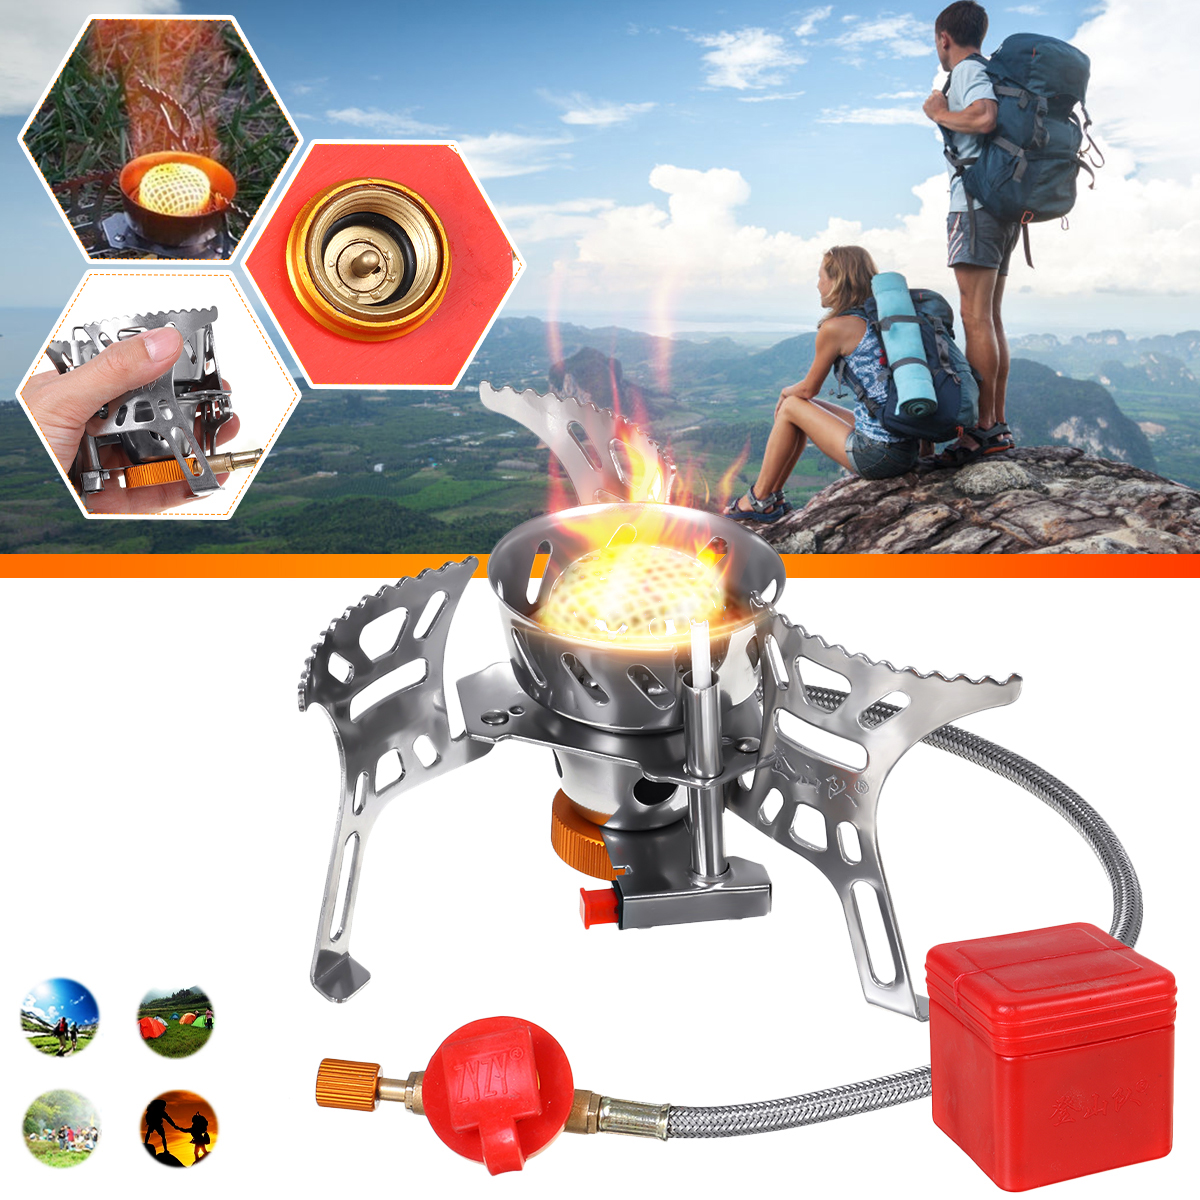 Automatic Gas Stove Windproof Cooking Stove Piezo Ignition Camping Stove Gas Burner Outdoor Travel Picnic